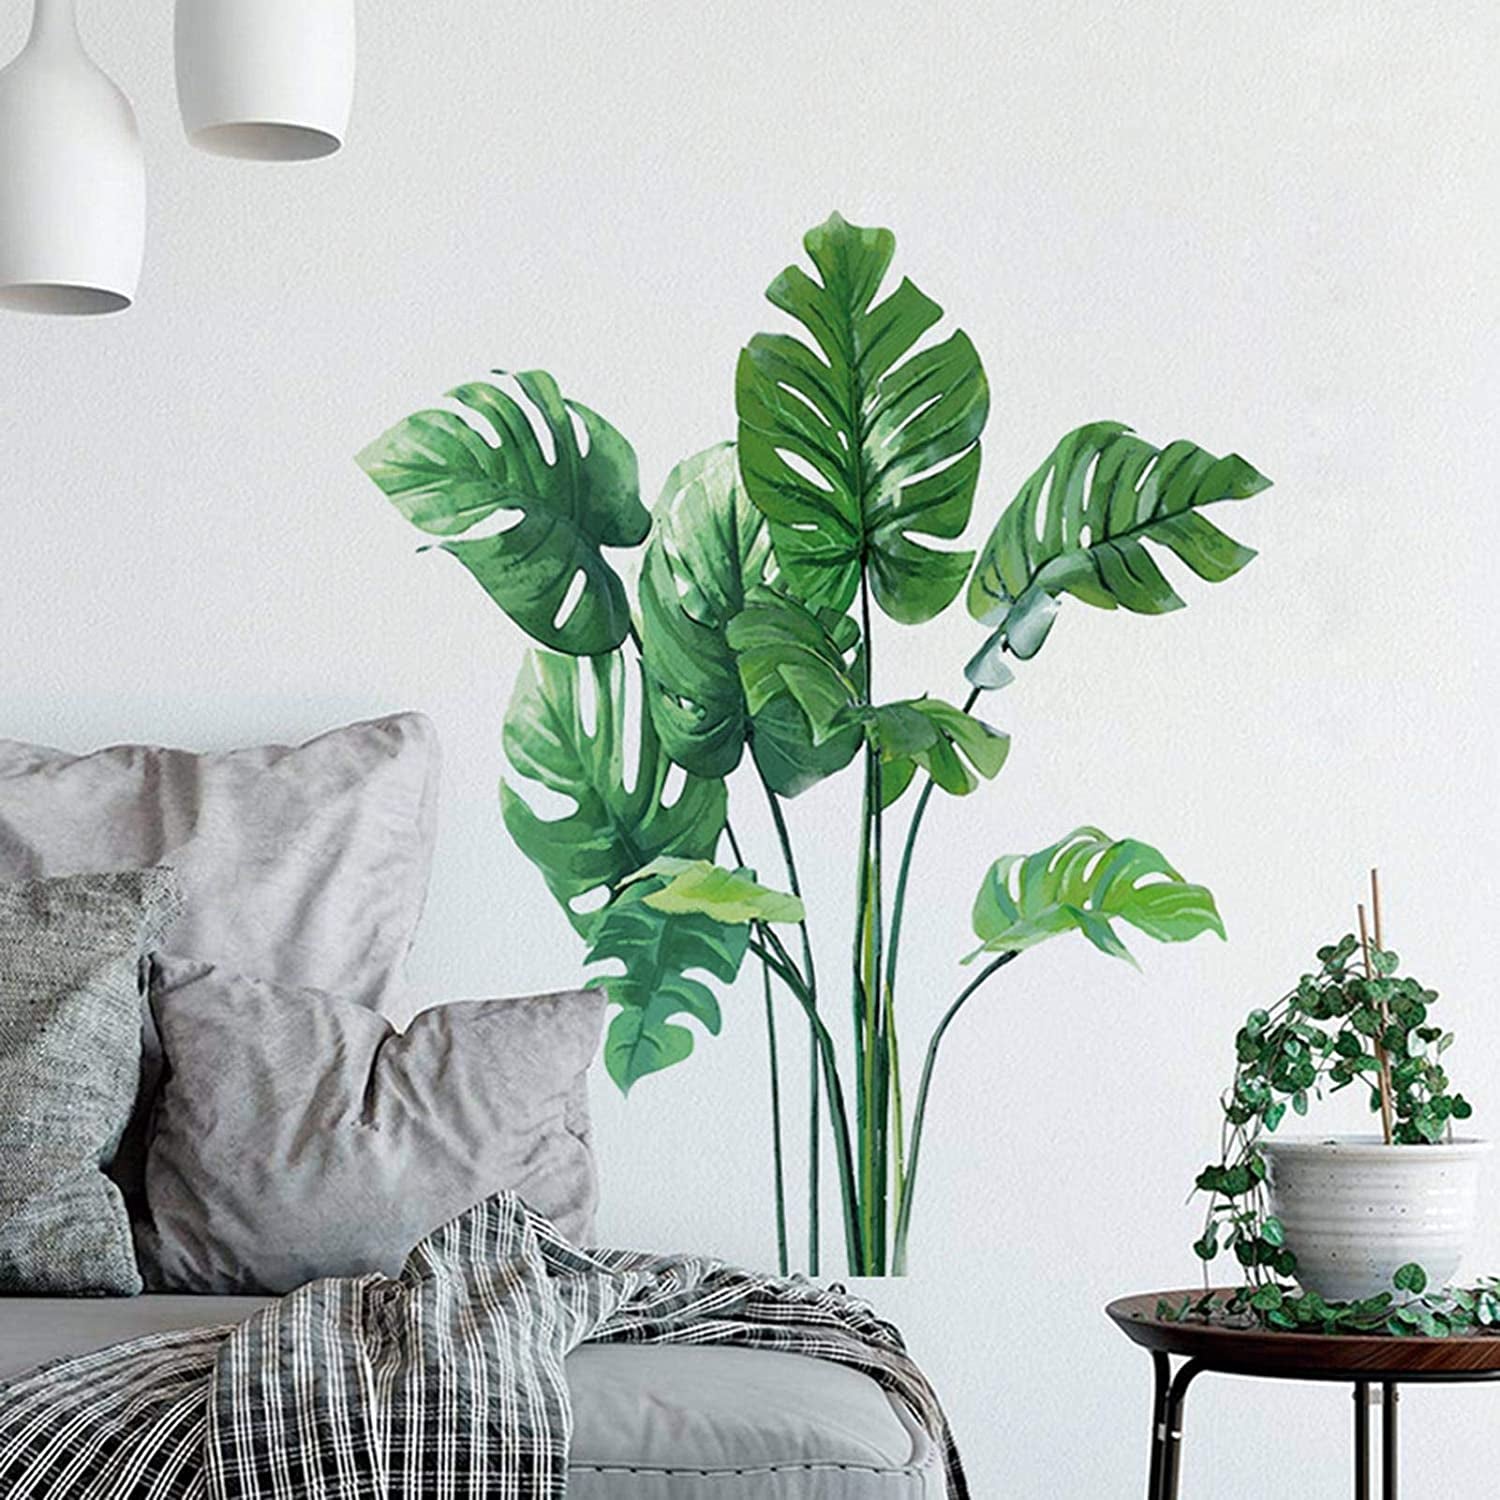 Eutecado, Leaf Wall Decals Monstera Leaf Tropical Plants Wall Stickers for Living Room, Palm Leaf Wall Posters Natural Green Plants Art Murals Vinyl Wallpaper for Bedroom Nursery Office